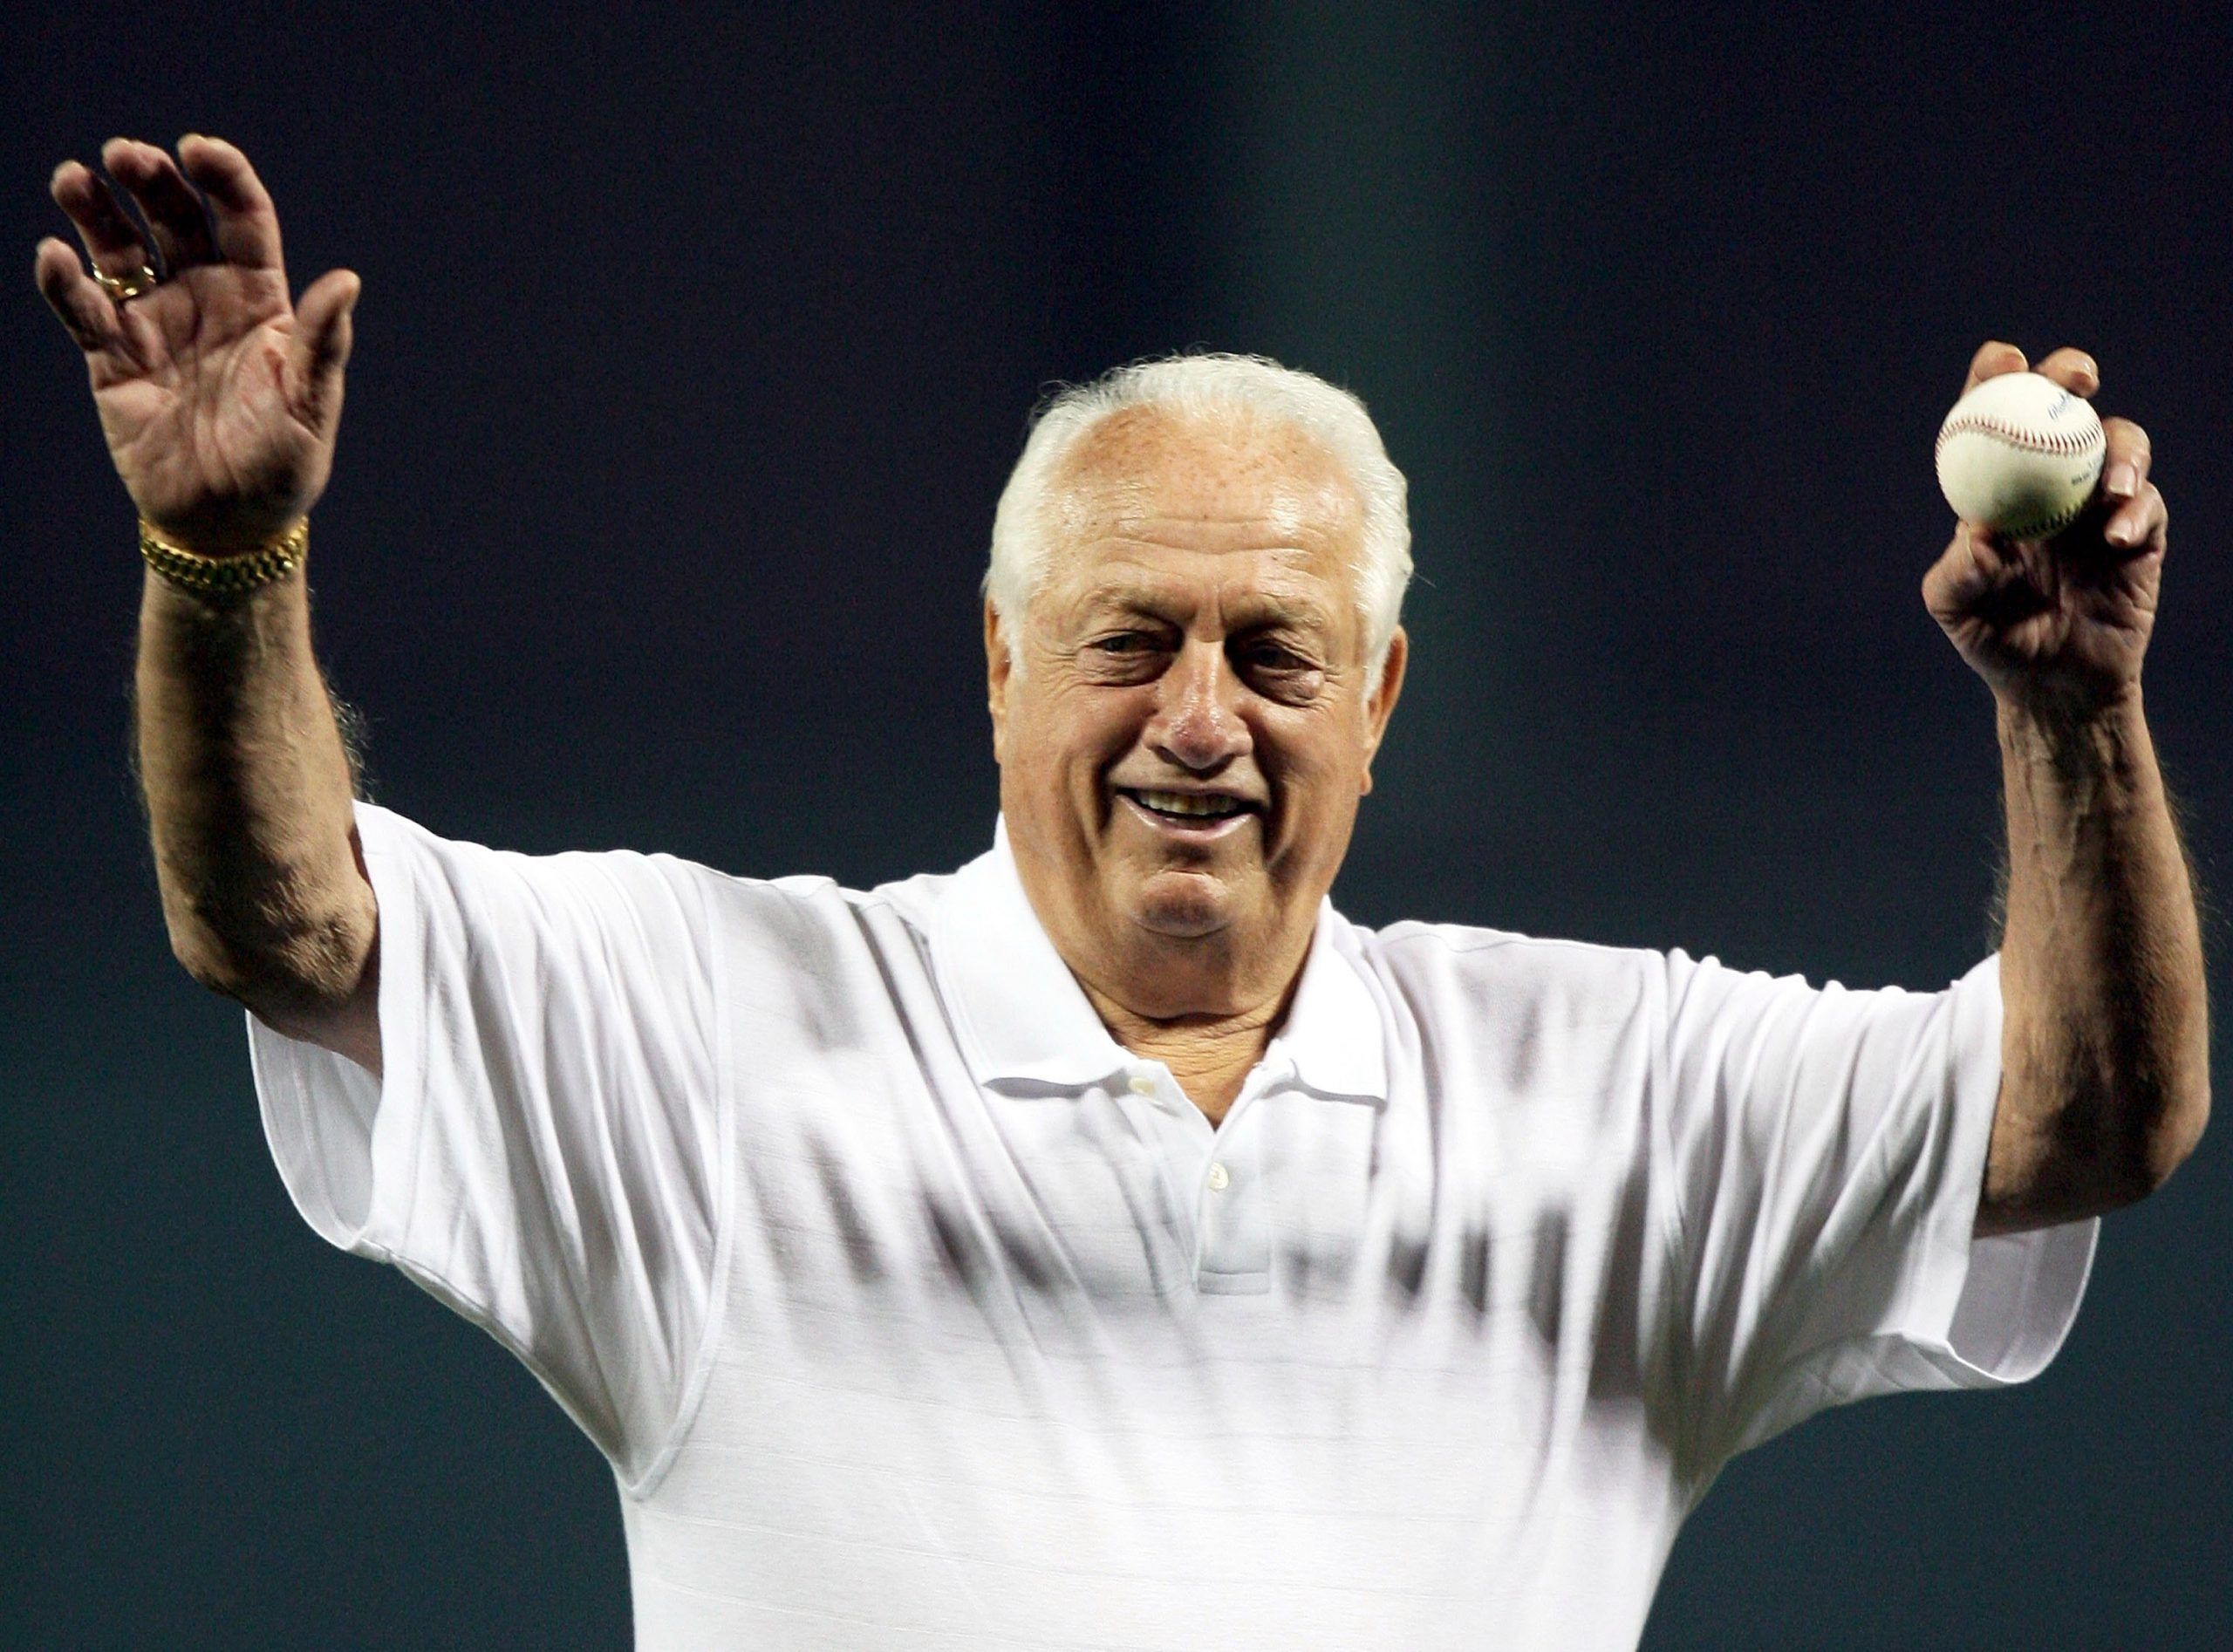 Tommy Lasorda, legendary Los Angeles Dodgers manager, has died